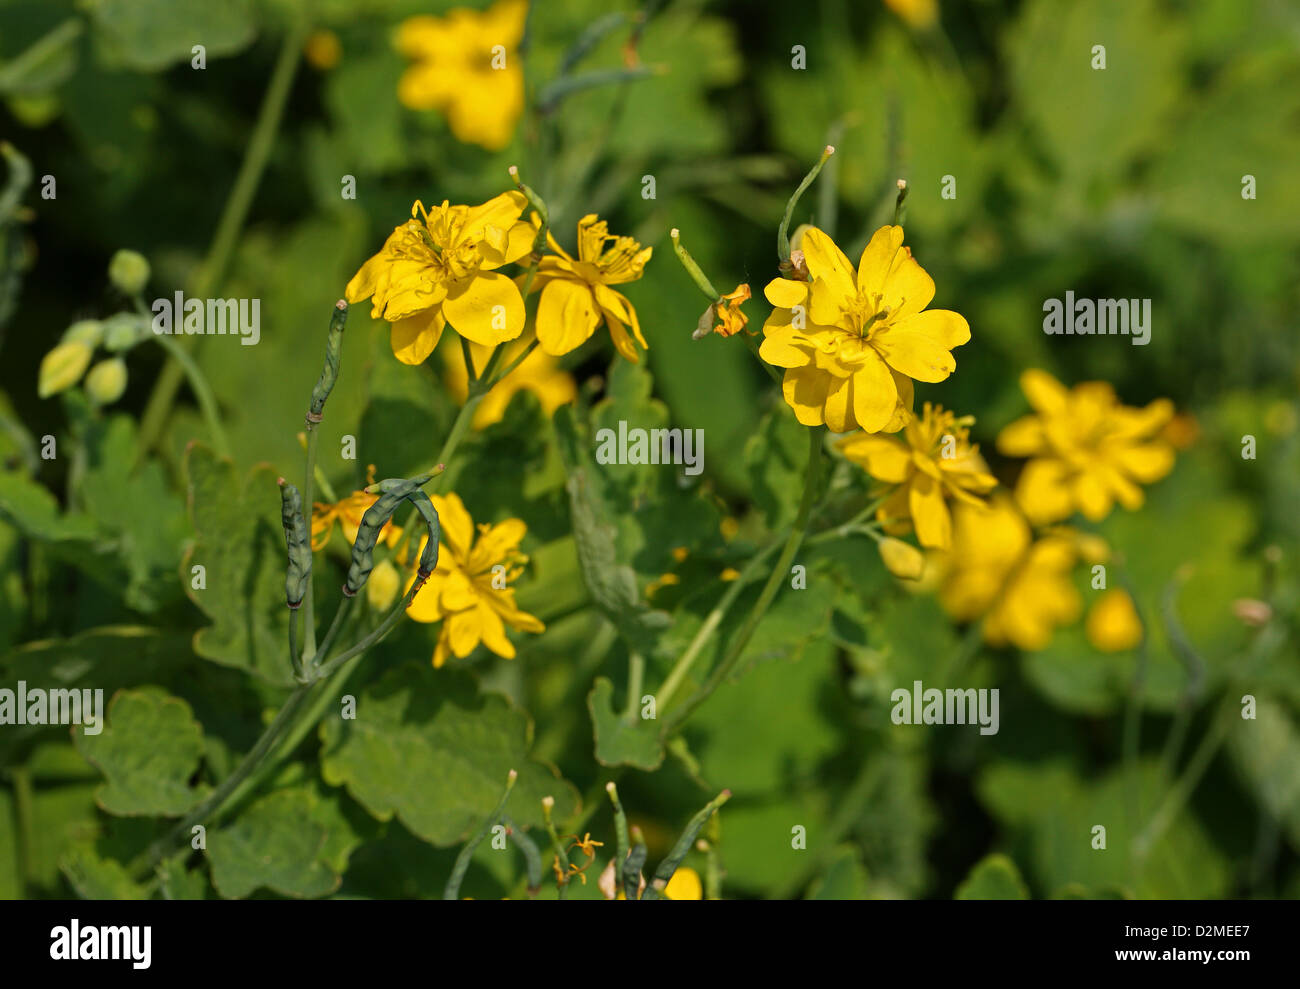 Double Flowered Greater Celendine, Chelidonium majus 'Flore Pleno', Papaveraceae. A cultivated variety with double flowers. Stock Photo